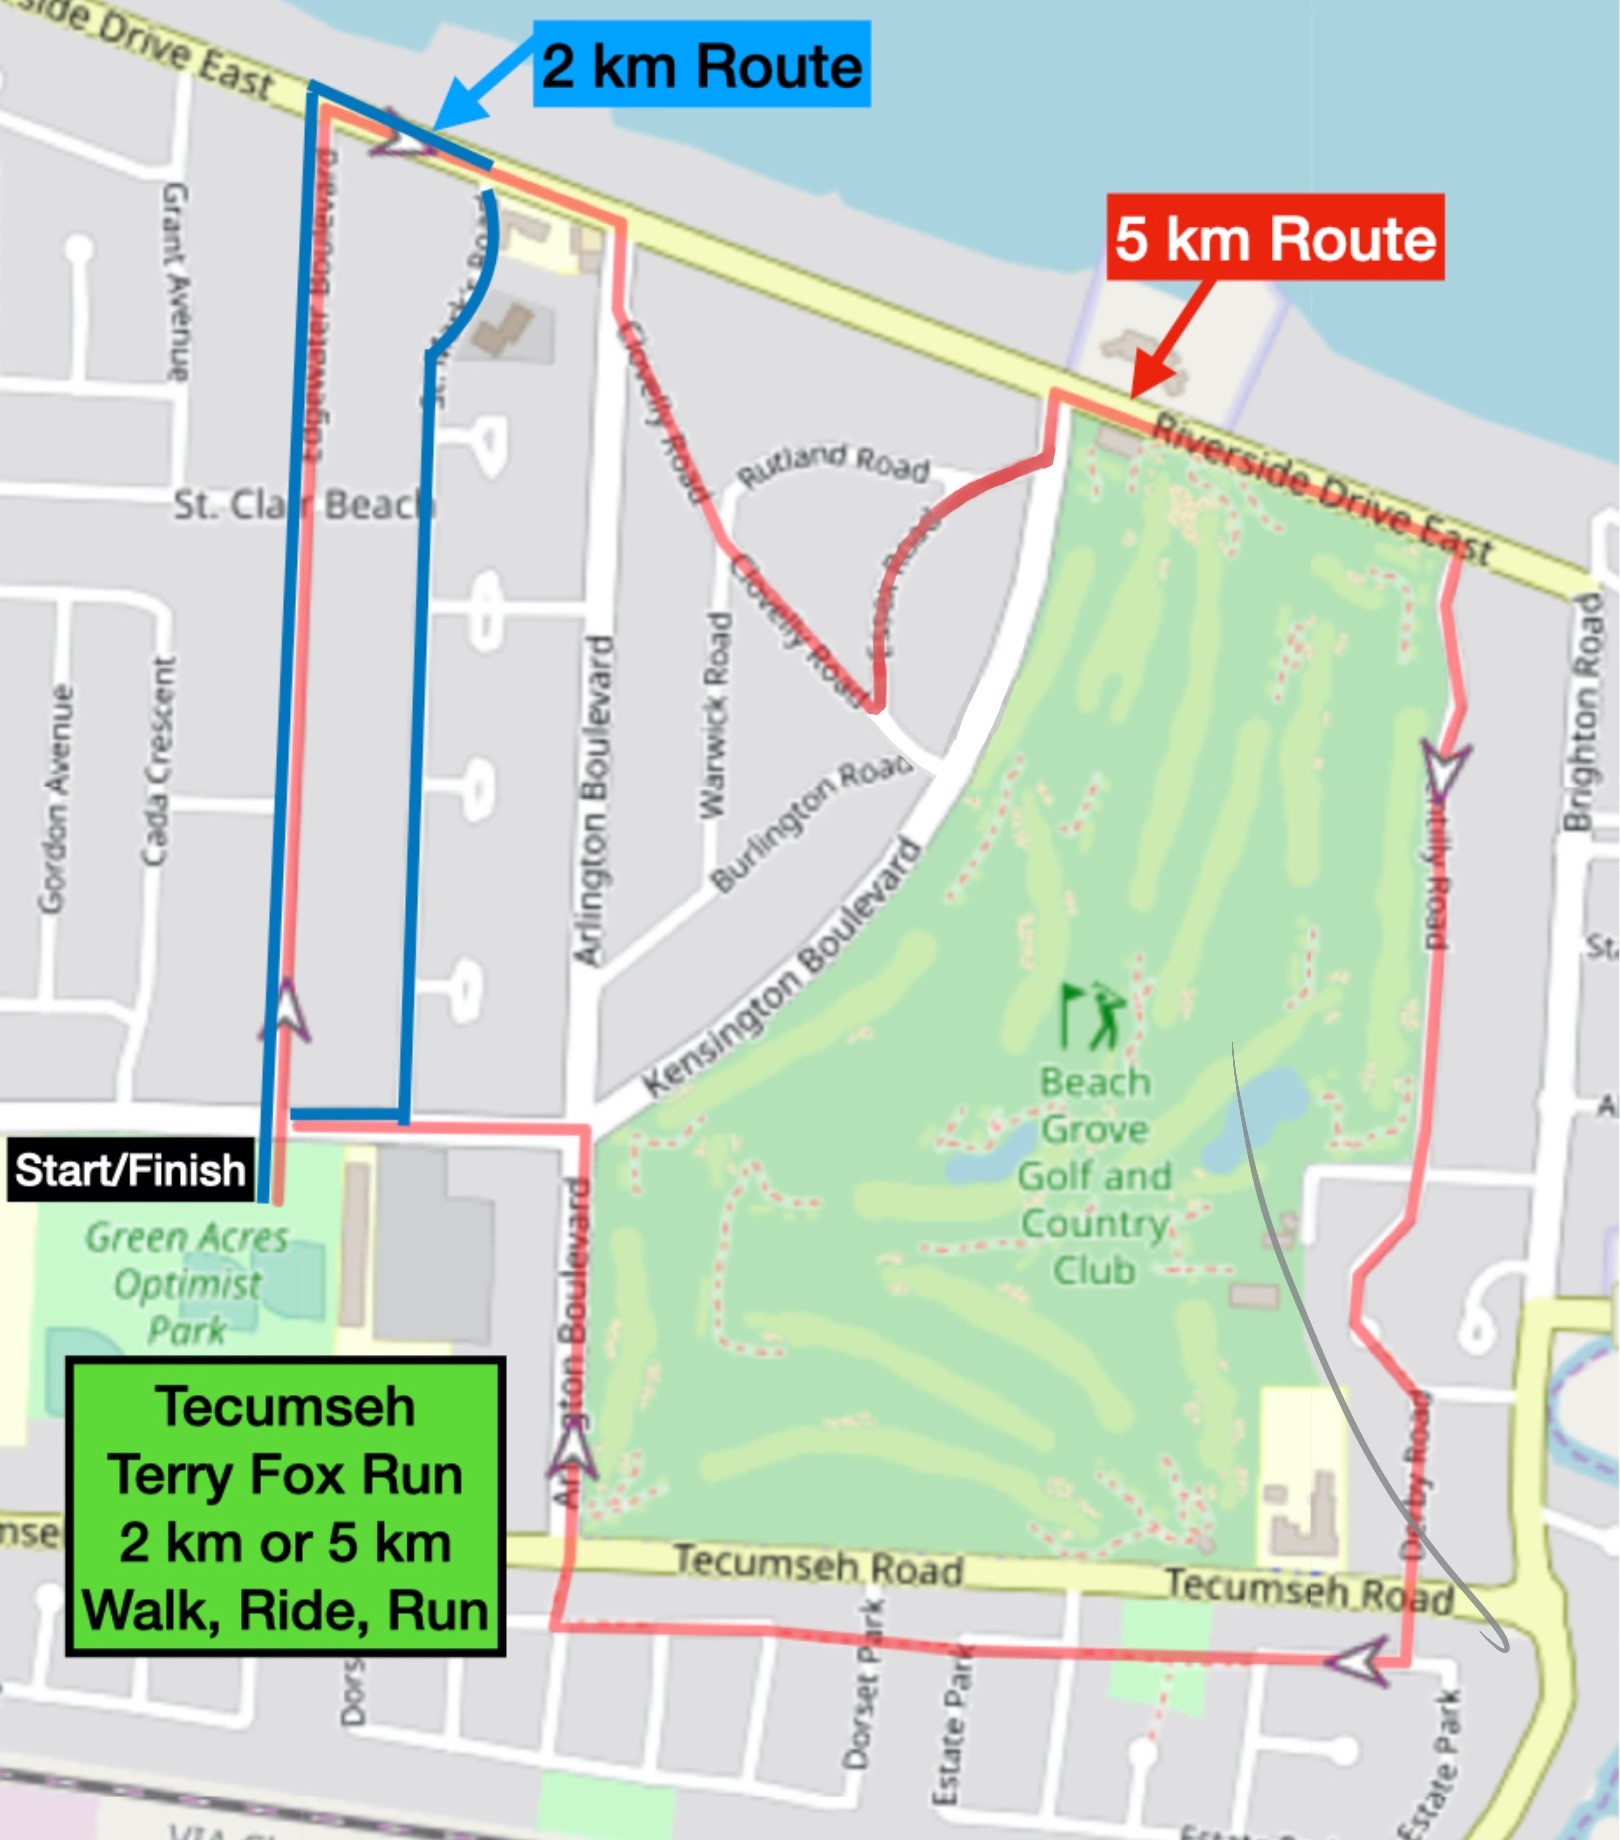 map for terry fox run in tecumseh - revised September 15